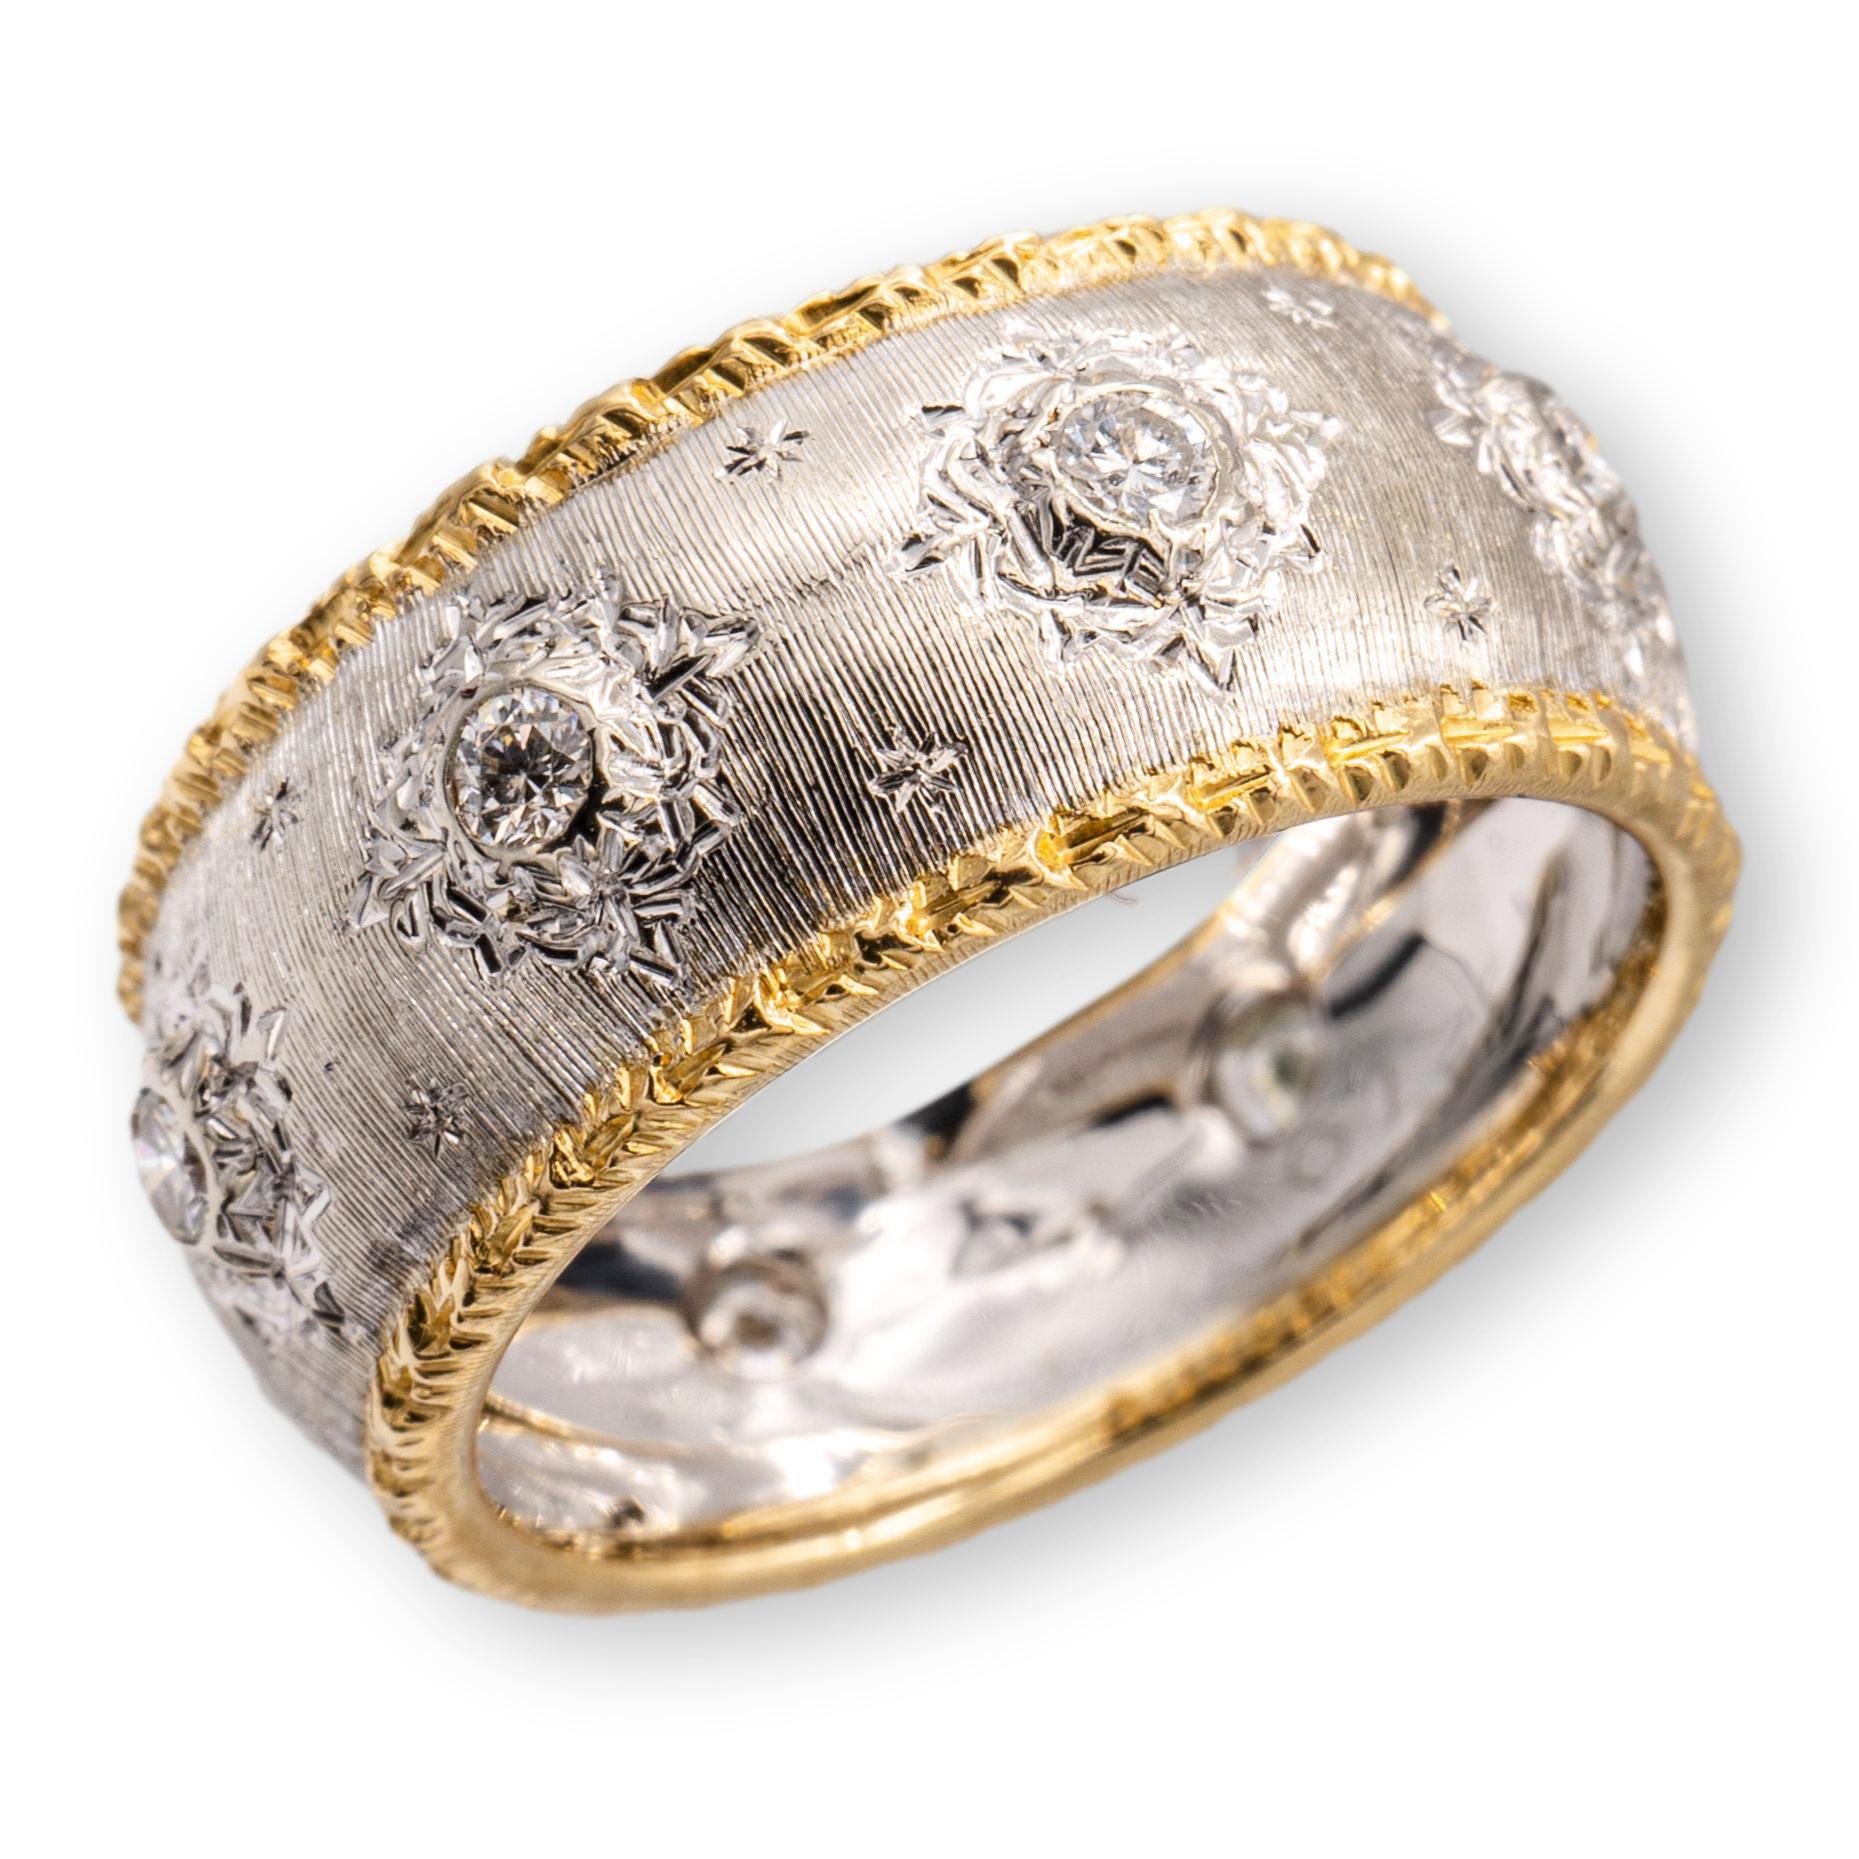 Estate Buccellati band ring from the 